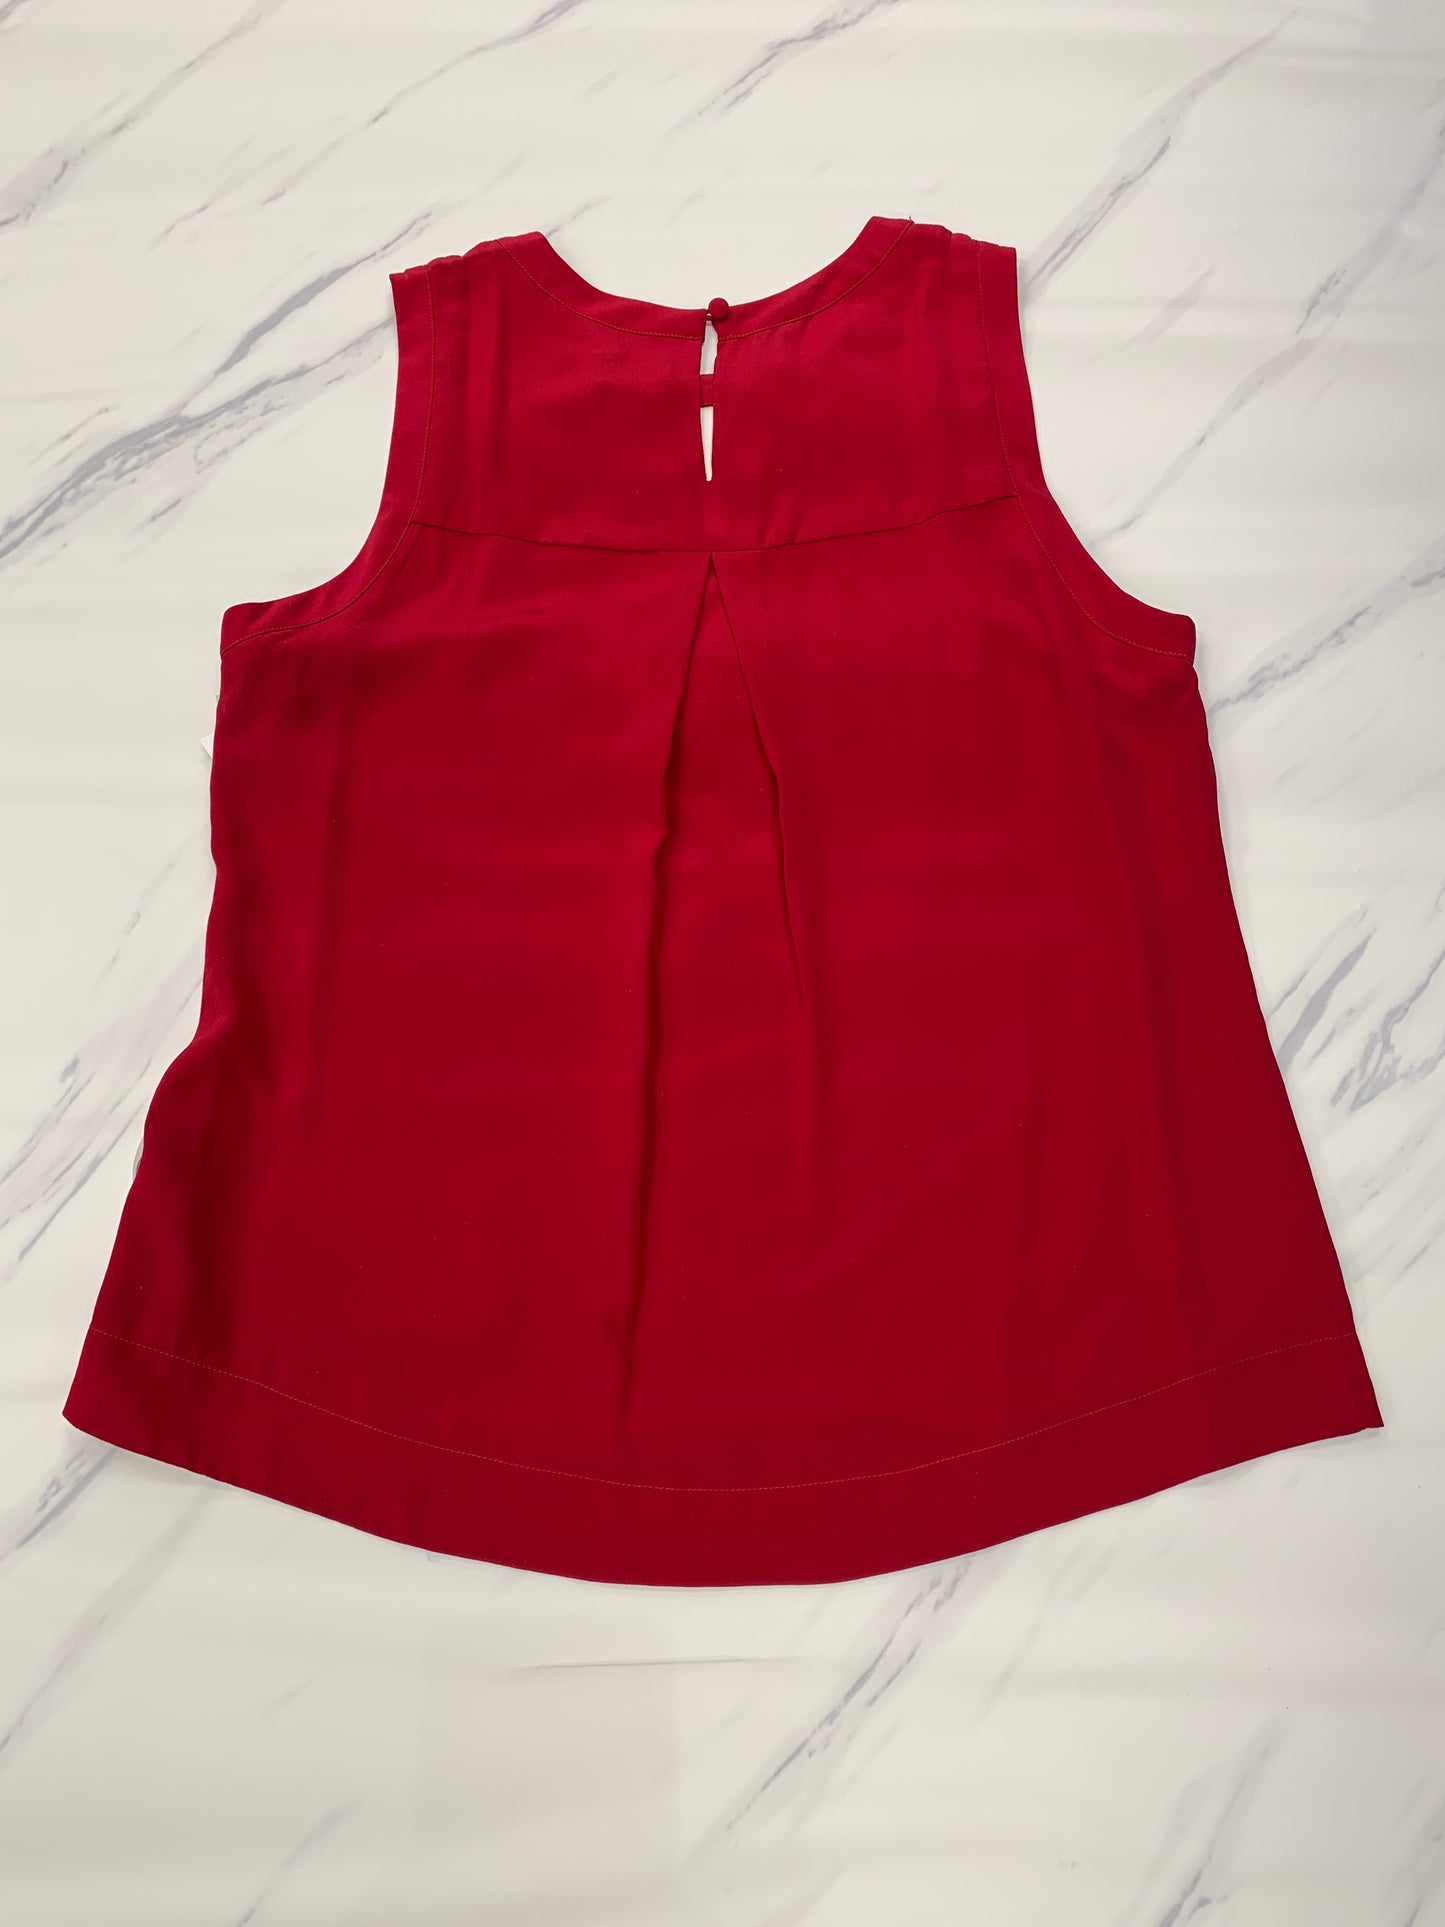 Top Sleeveless By Neiman Marcus  Size: M